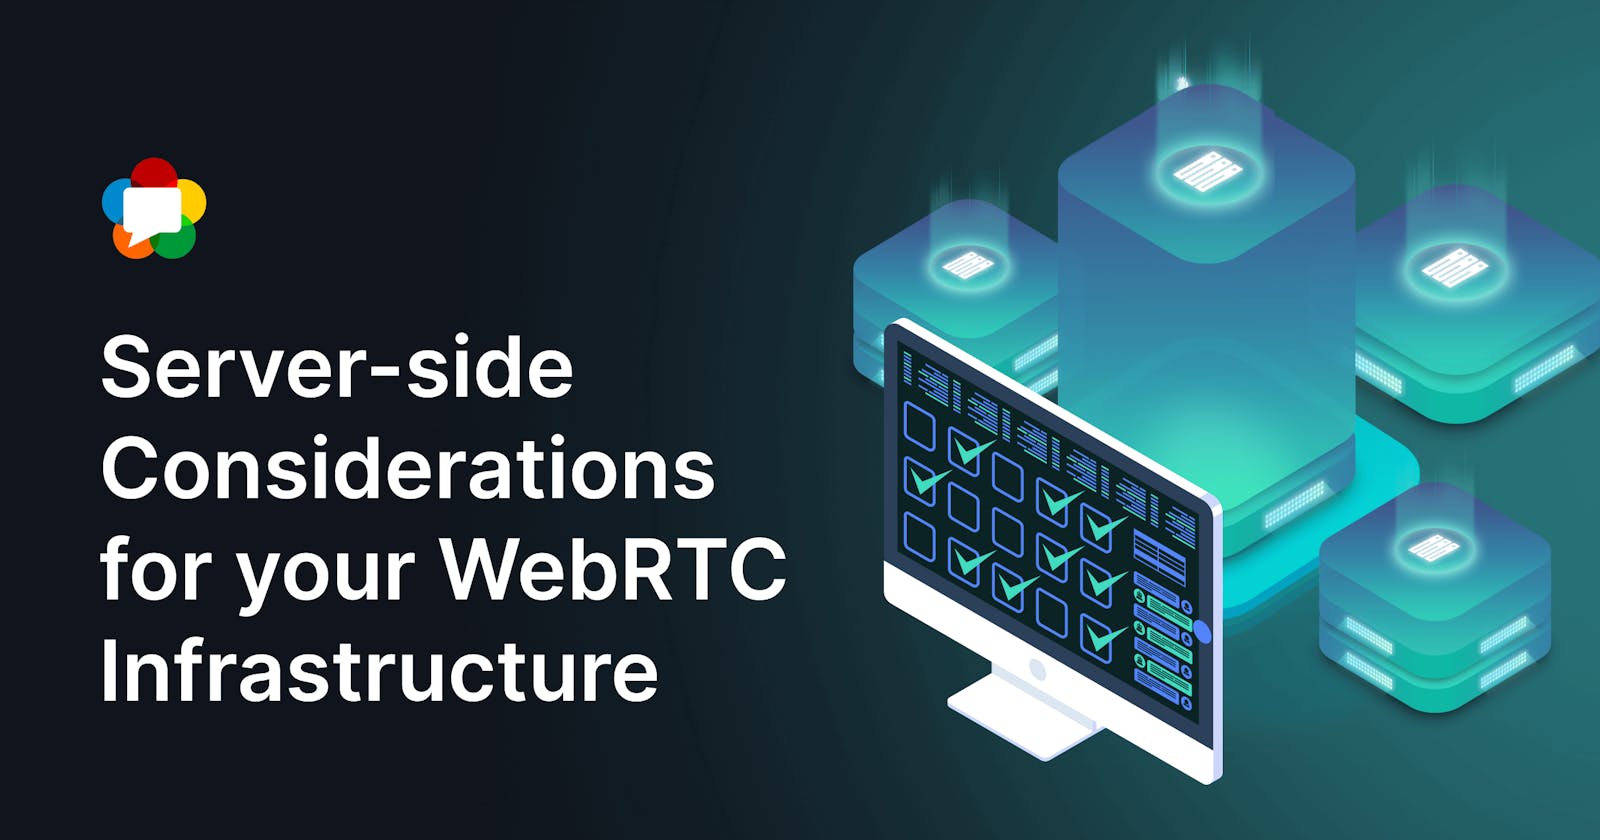 Server-side Considerations for your WebRTC Infrastructure